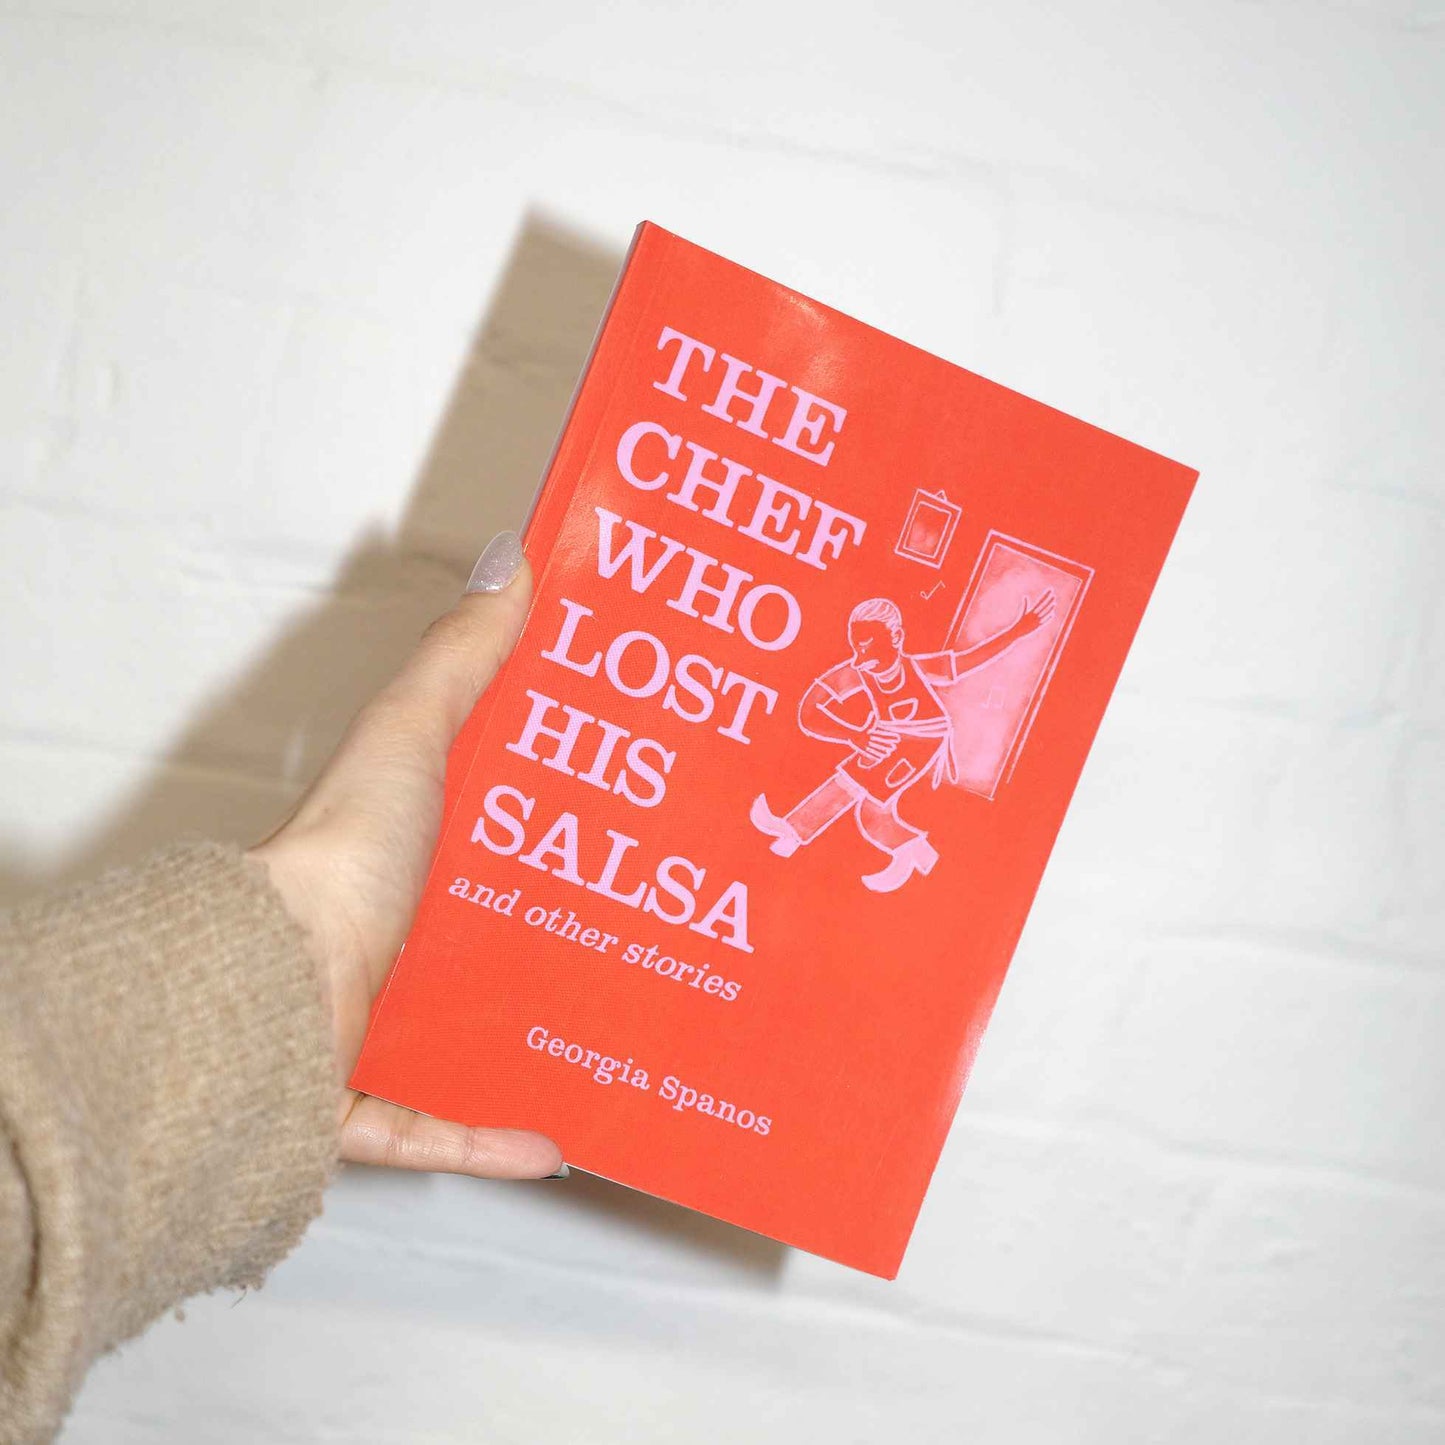 ‘The Chef Who Lost His Salsa’ Short Stories